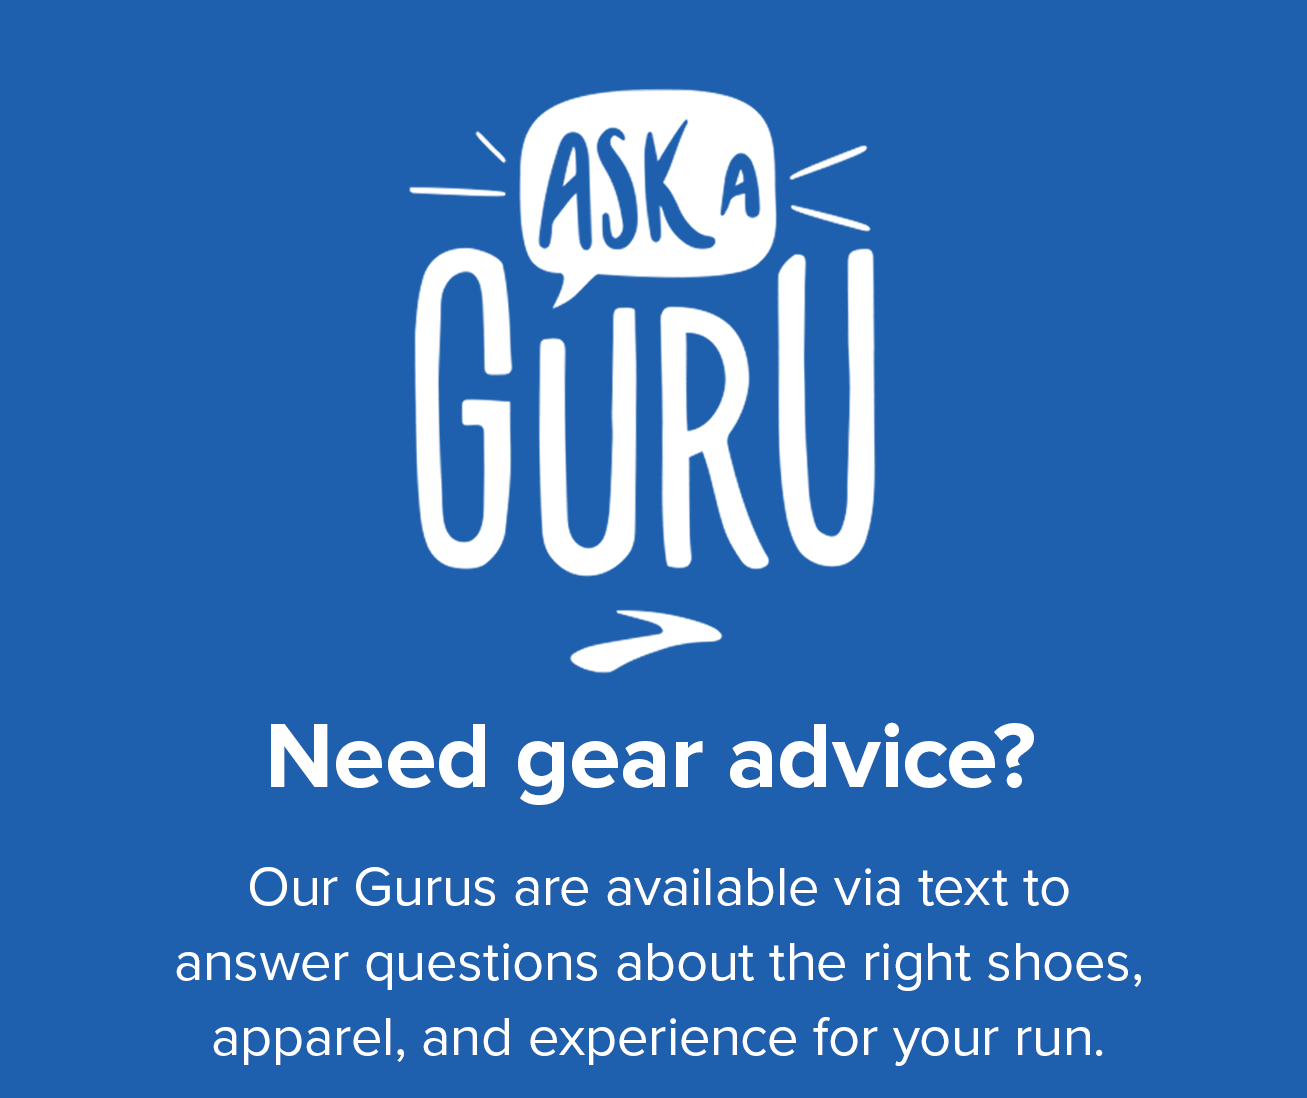 Need gear advice? Our Gurus are available via text to answer questions about the right shoes, apparel, and experience for your run.